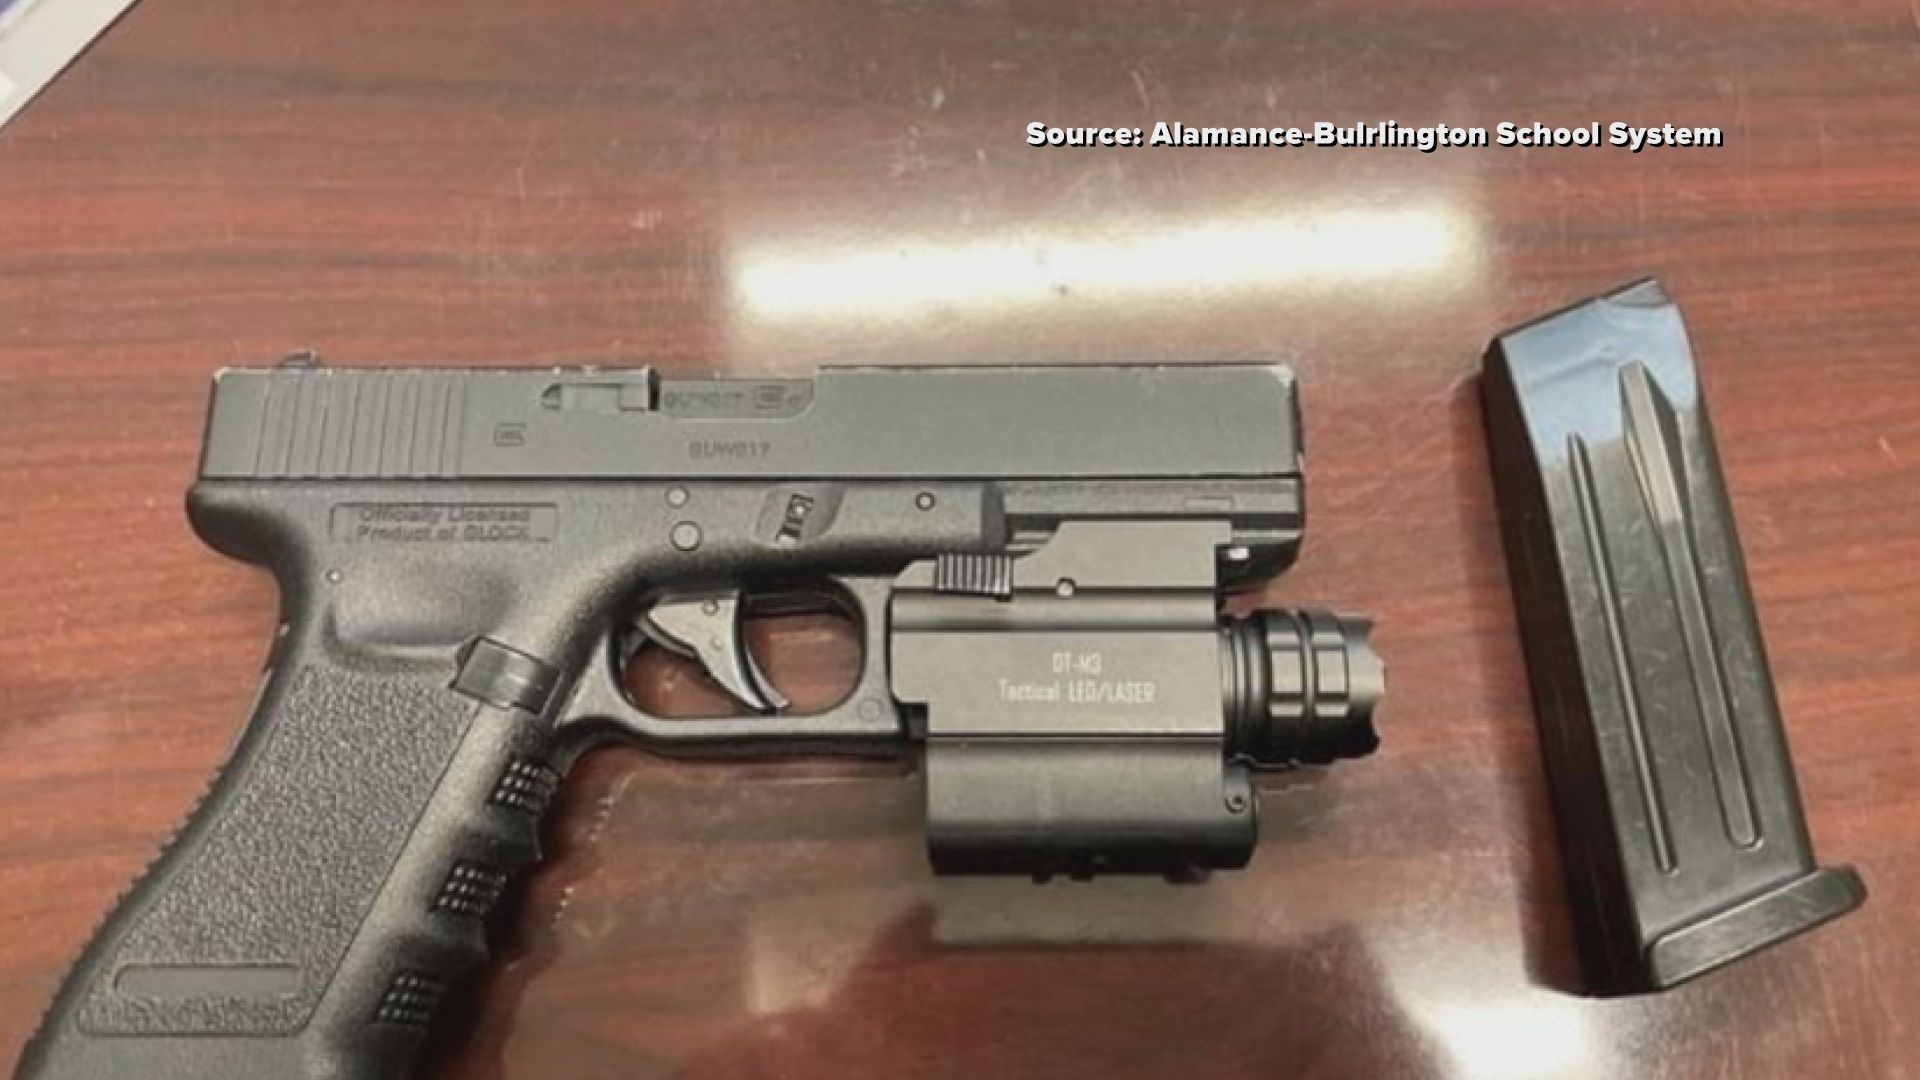 ABSS leaders say fake guns can have real consequences because they look so much like actual weapons.